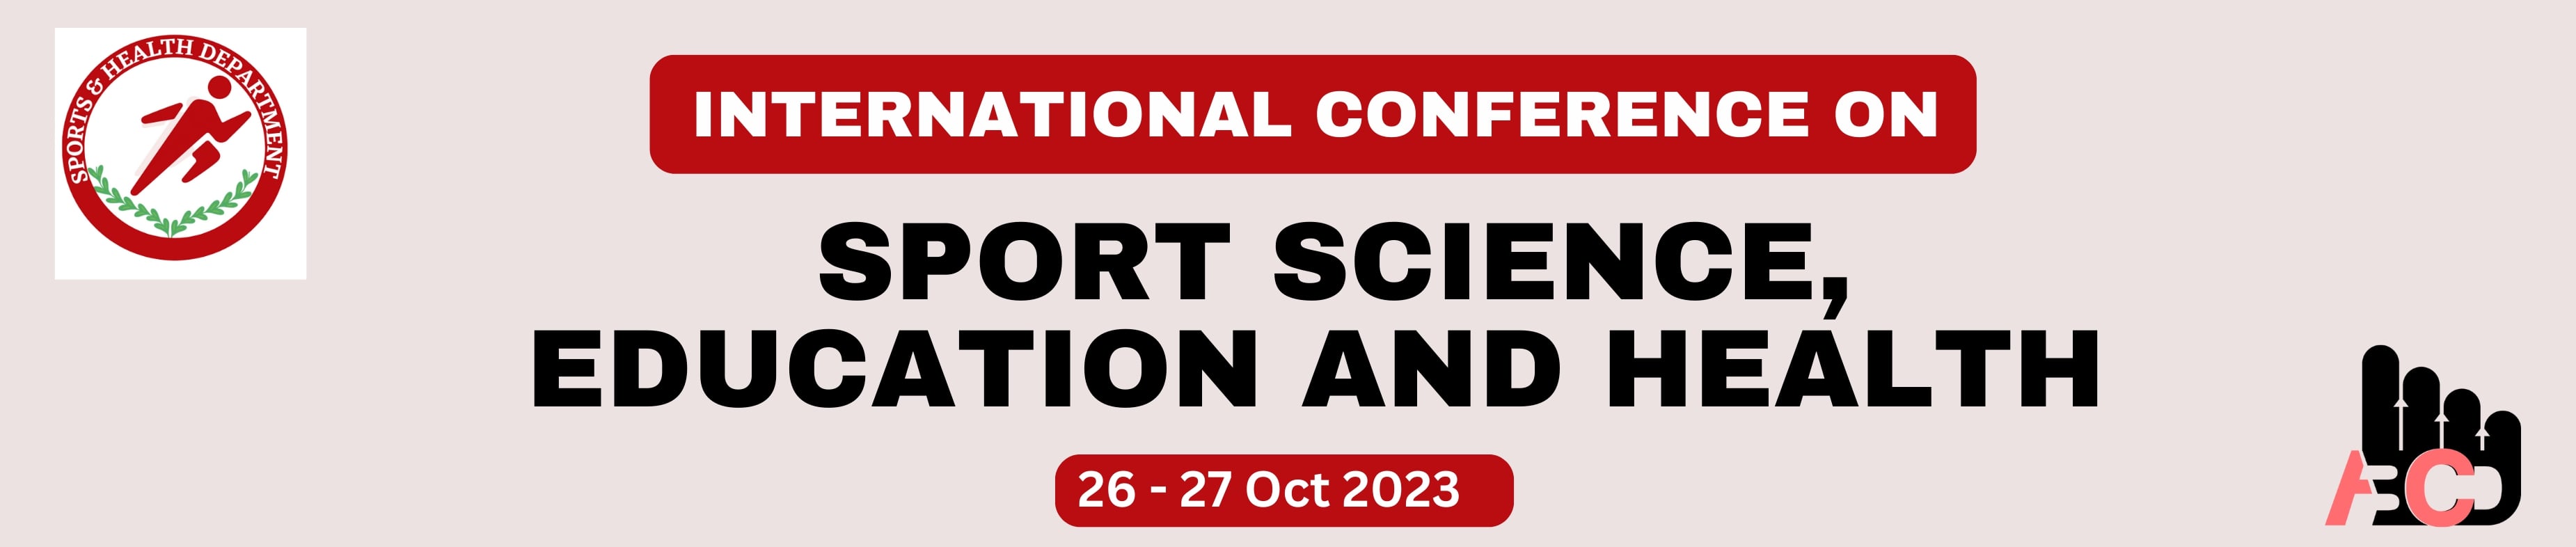 International Conference on Sport Science, Education and Health (ICSSEH), Bhopal, Madhya Pradesh, India